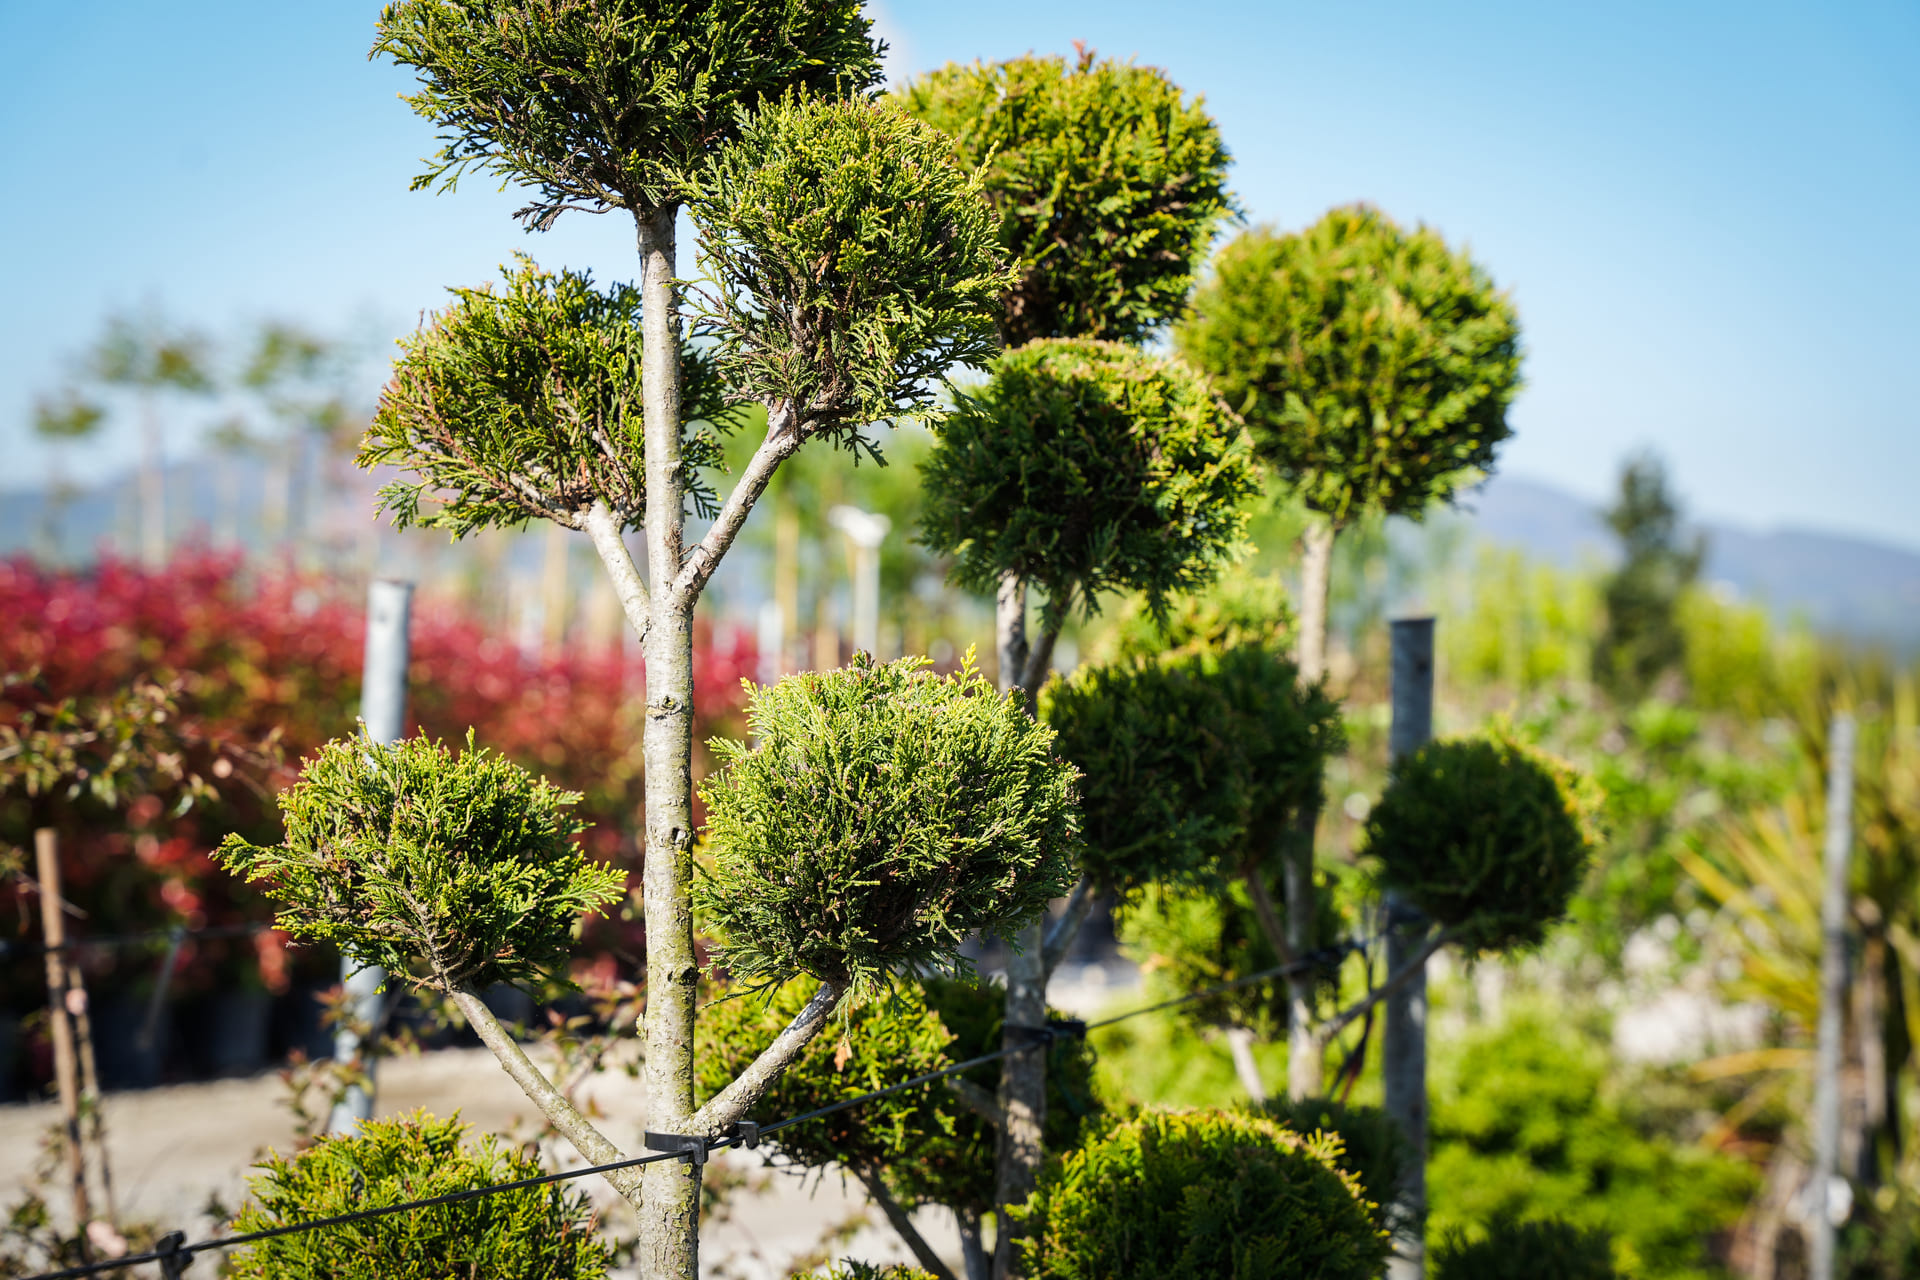 Topiary | An ancient art, handed down for your garden